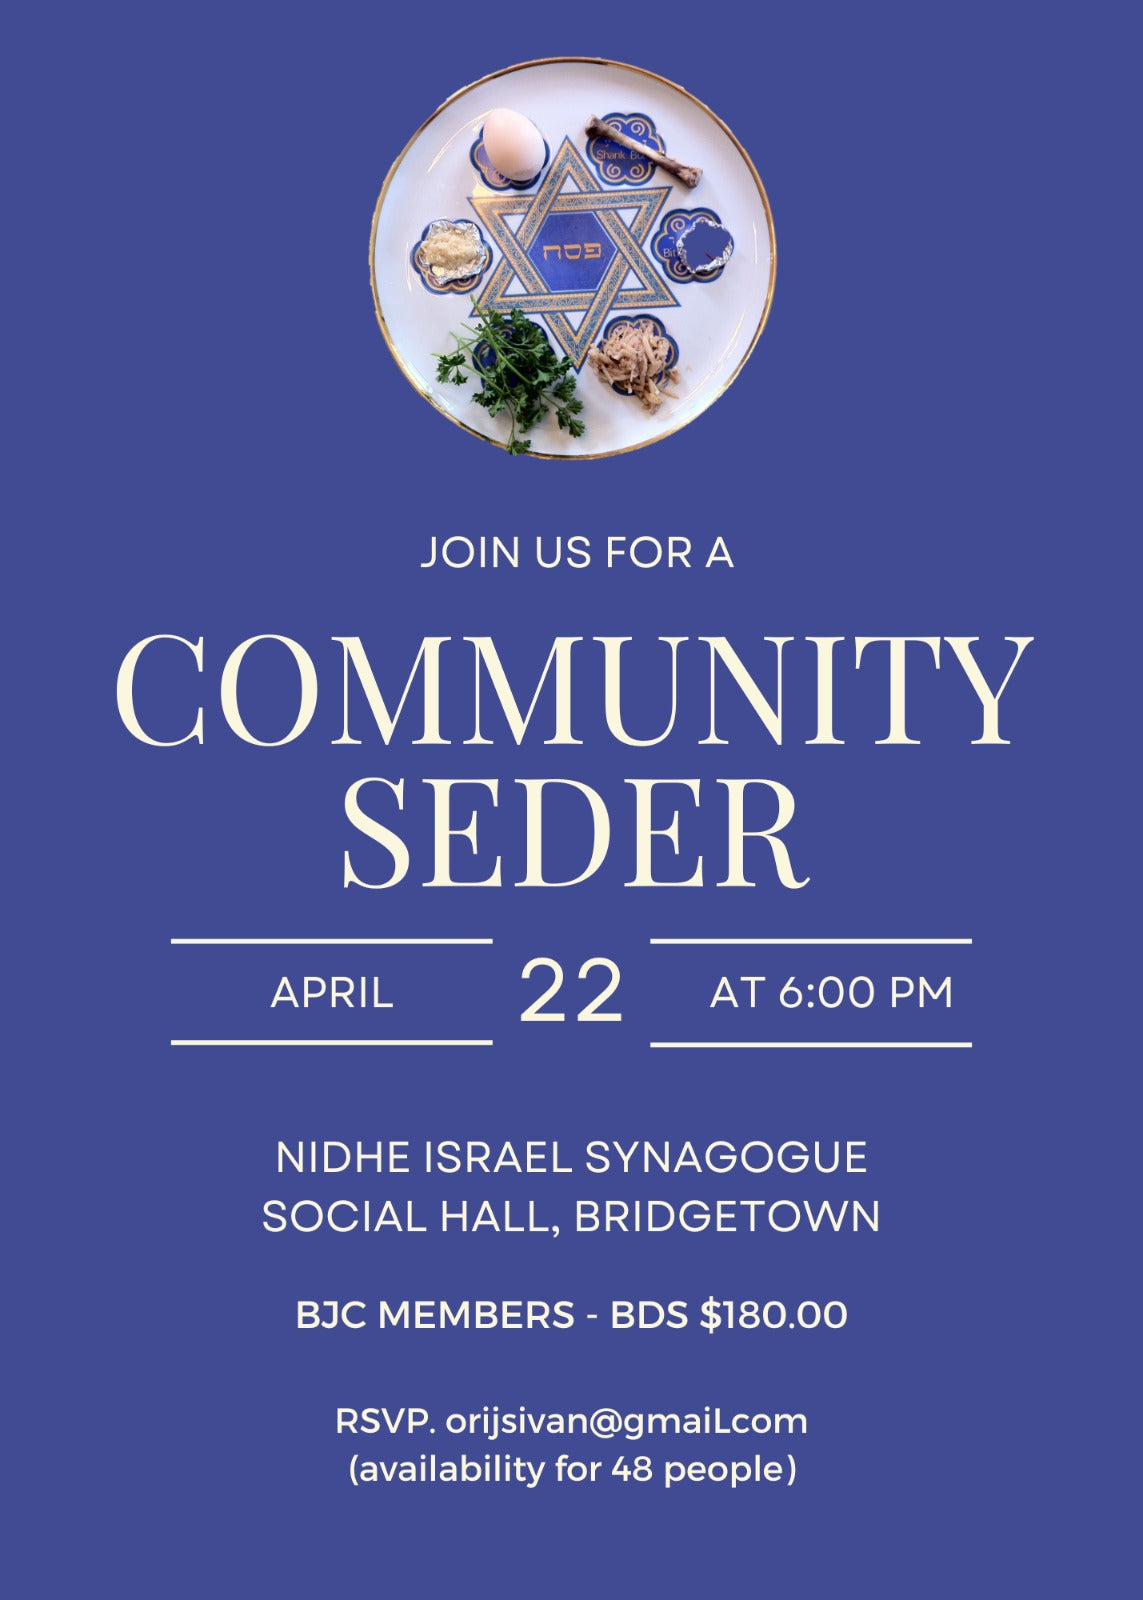 JOIN US FOR OUR COMMUNITY SEDER